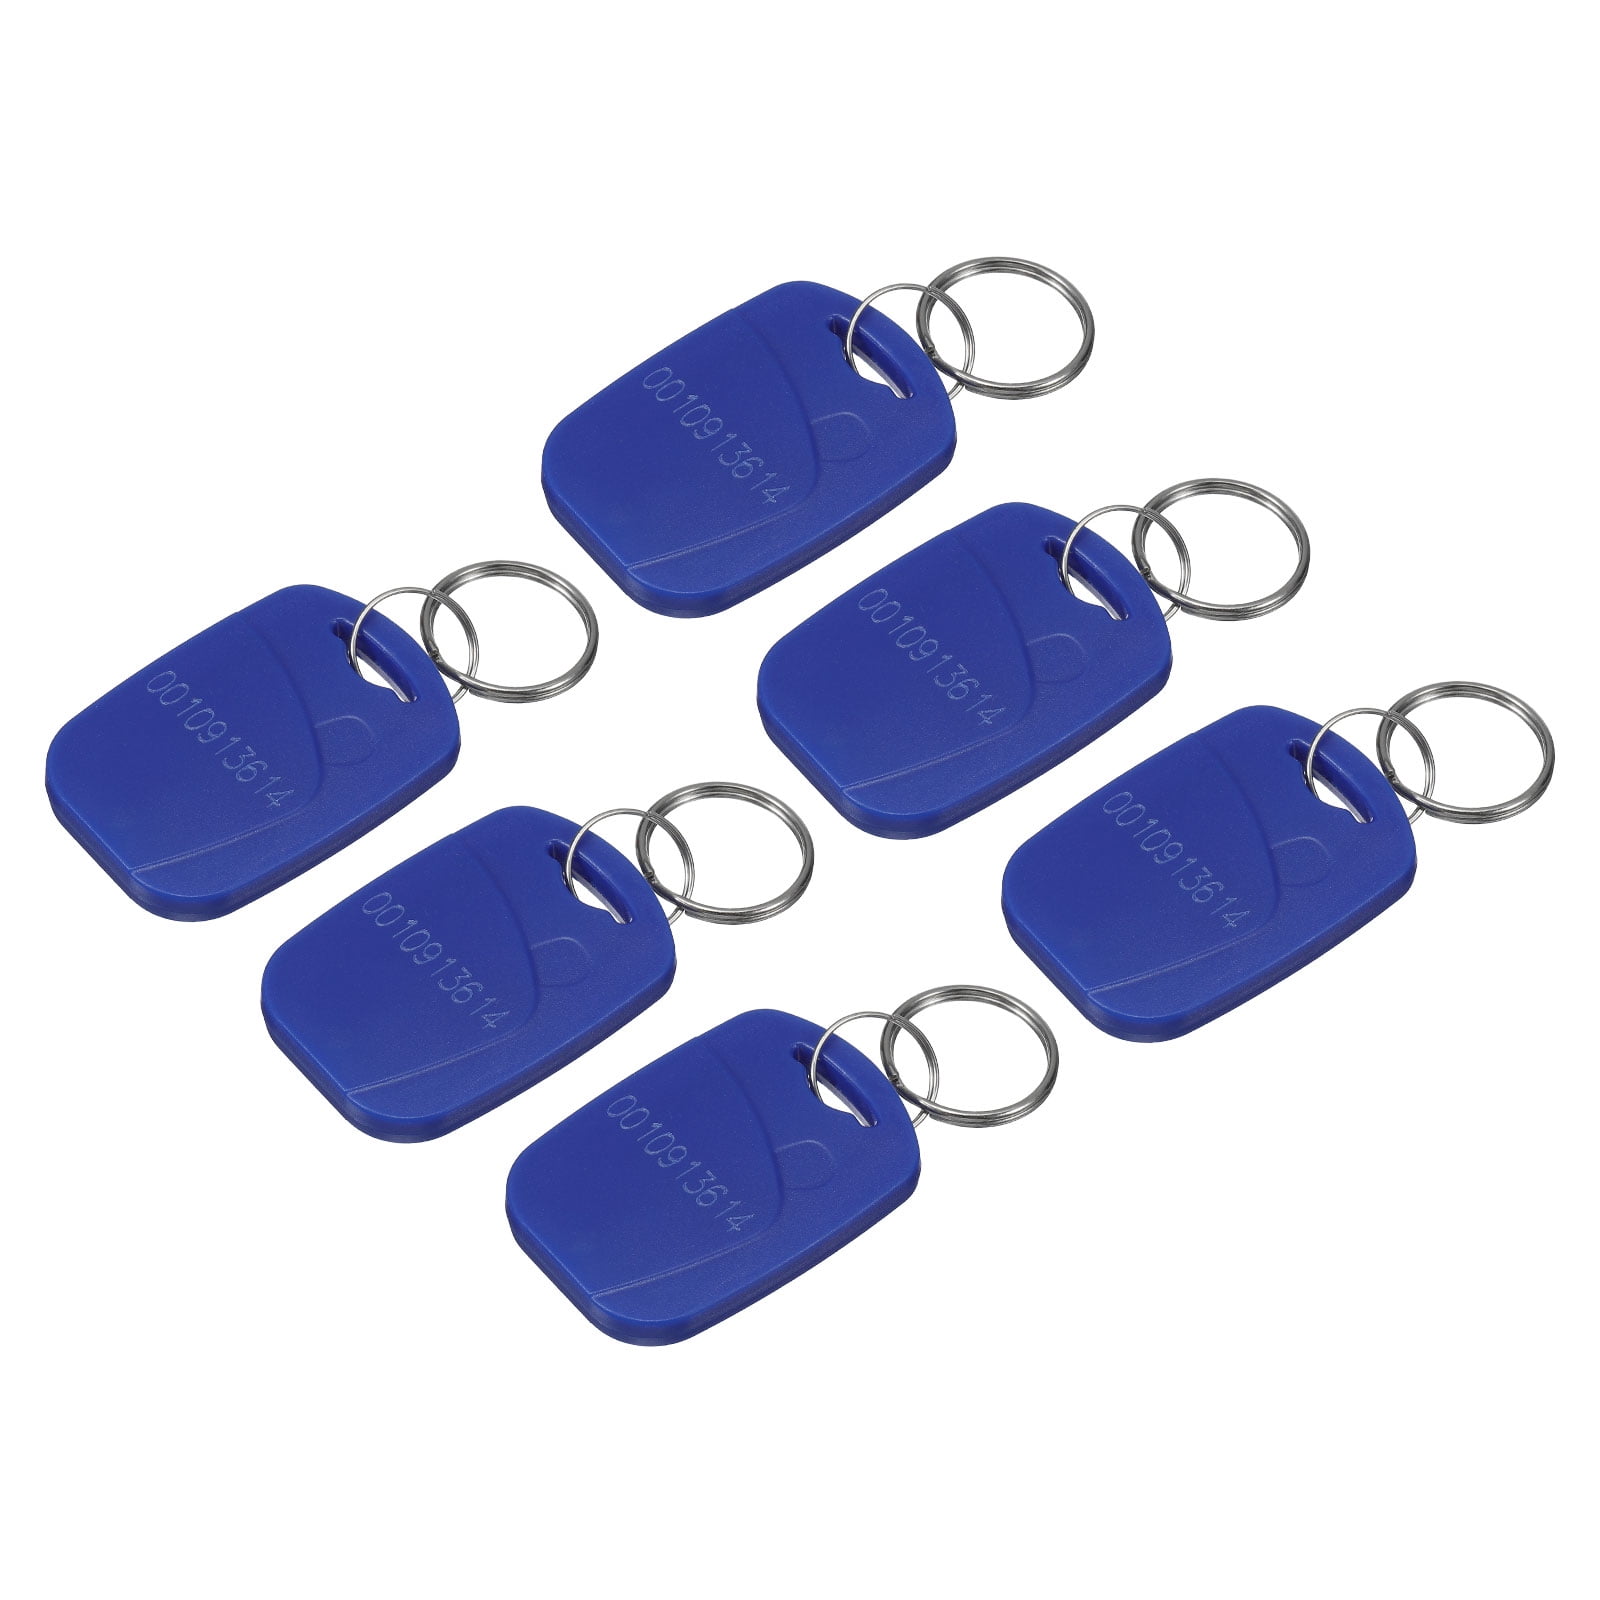 BAZIC Key Tags with Holder & Label Window (6/Pack) Bazic Products